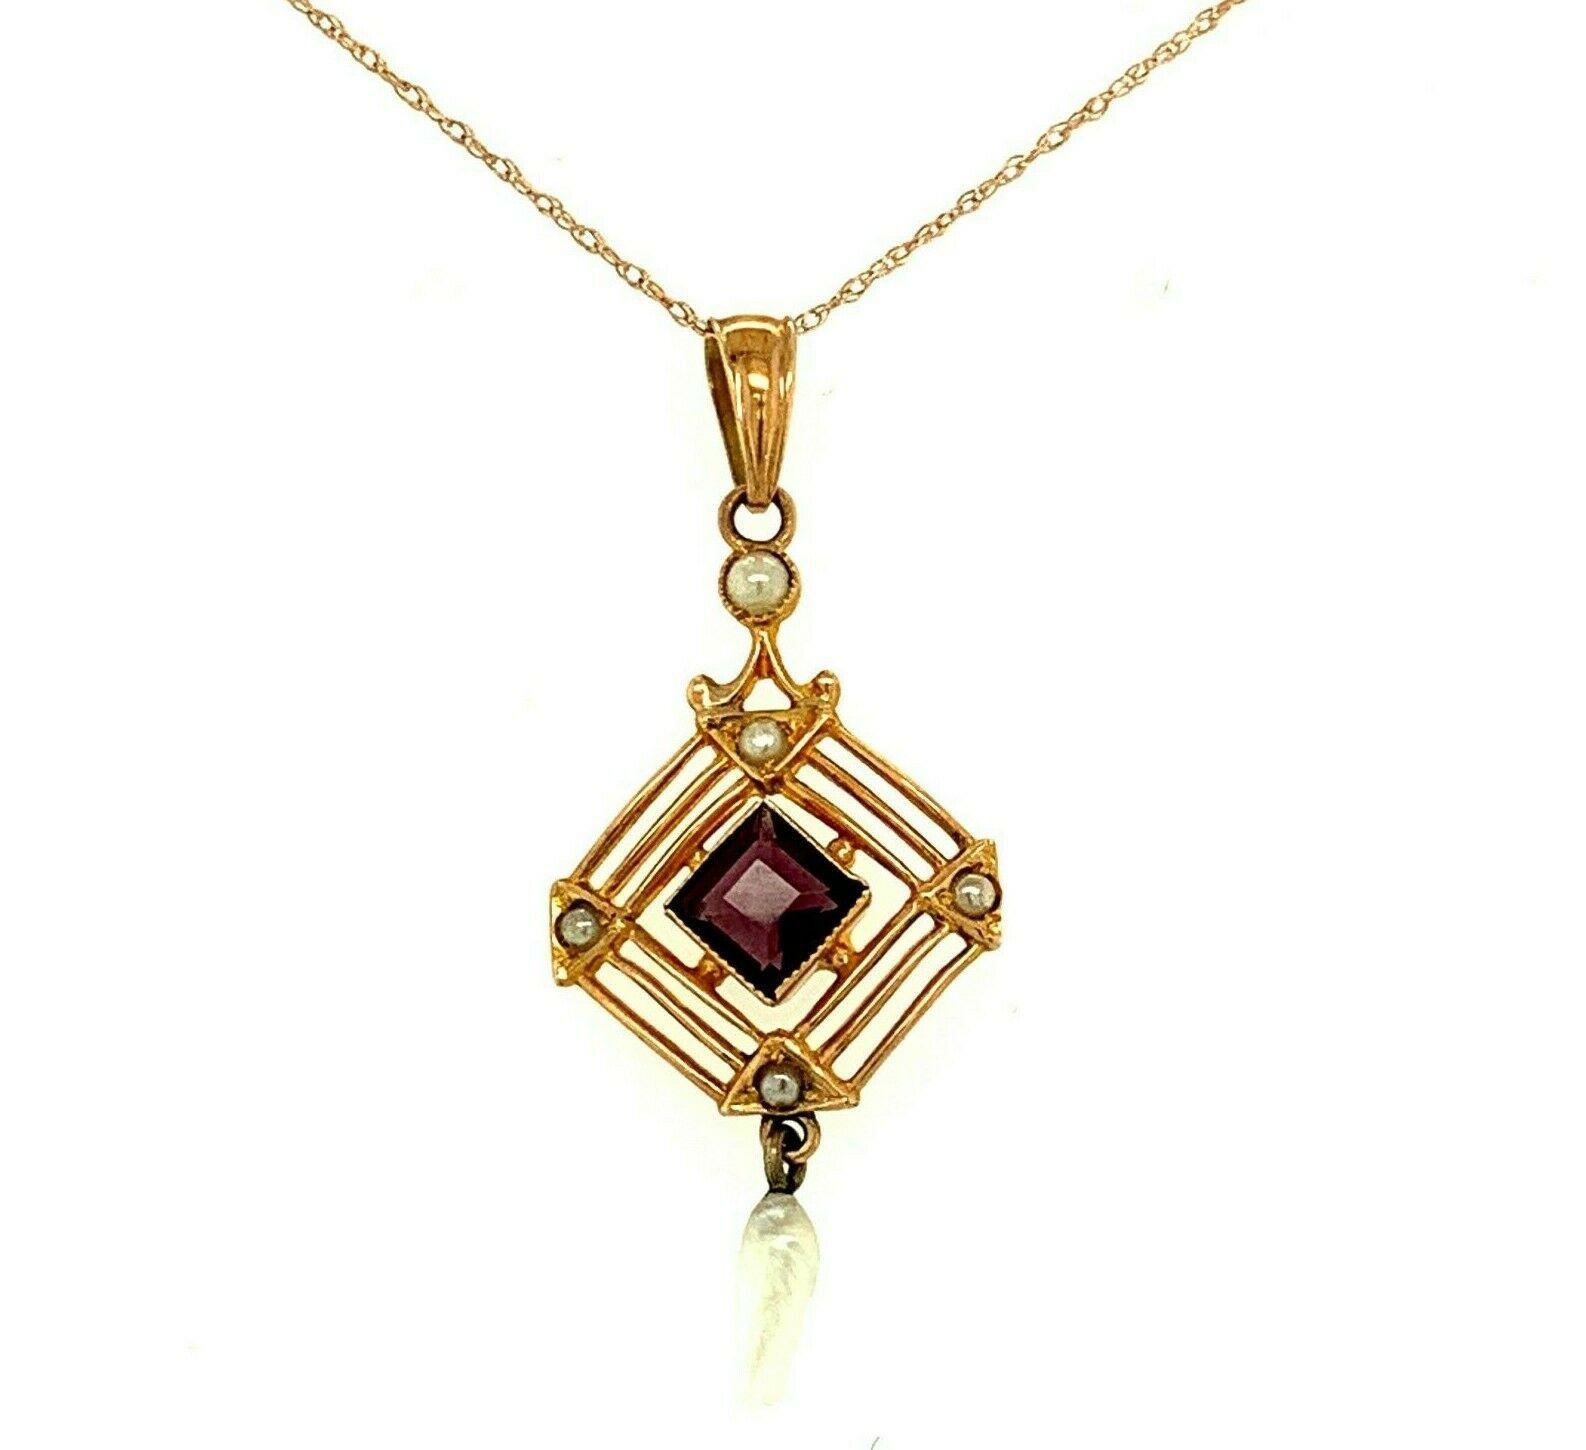 Primary image for 10k Yellow Gold Lavaliere Pendant with Purple Stone Seed Pearl (#J4787)